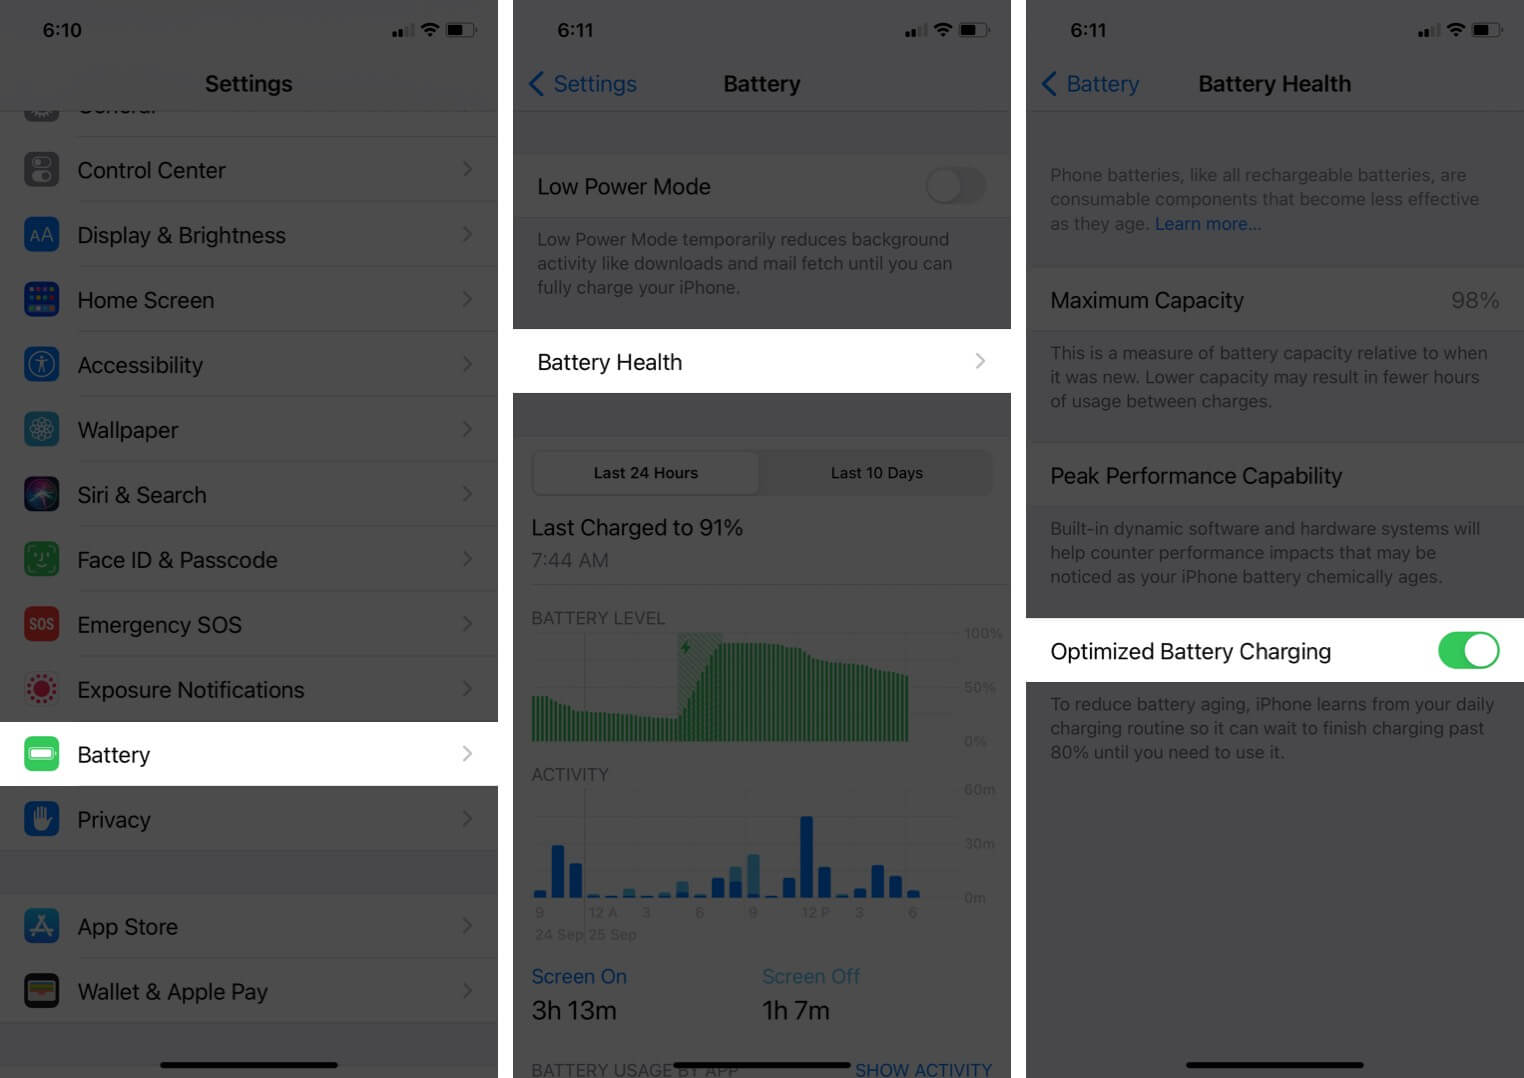 enable optimized battery charging on iphone